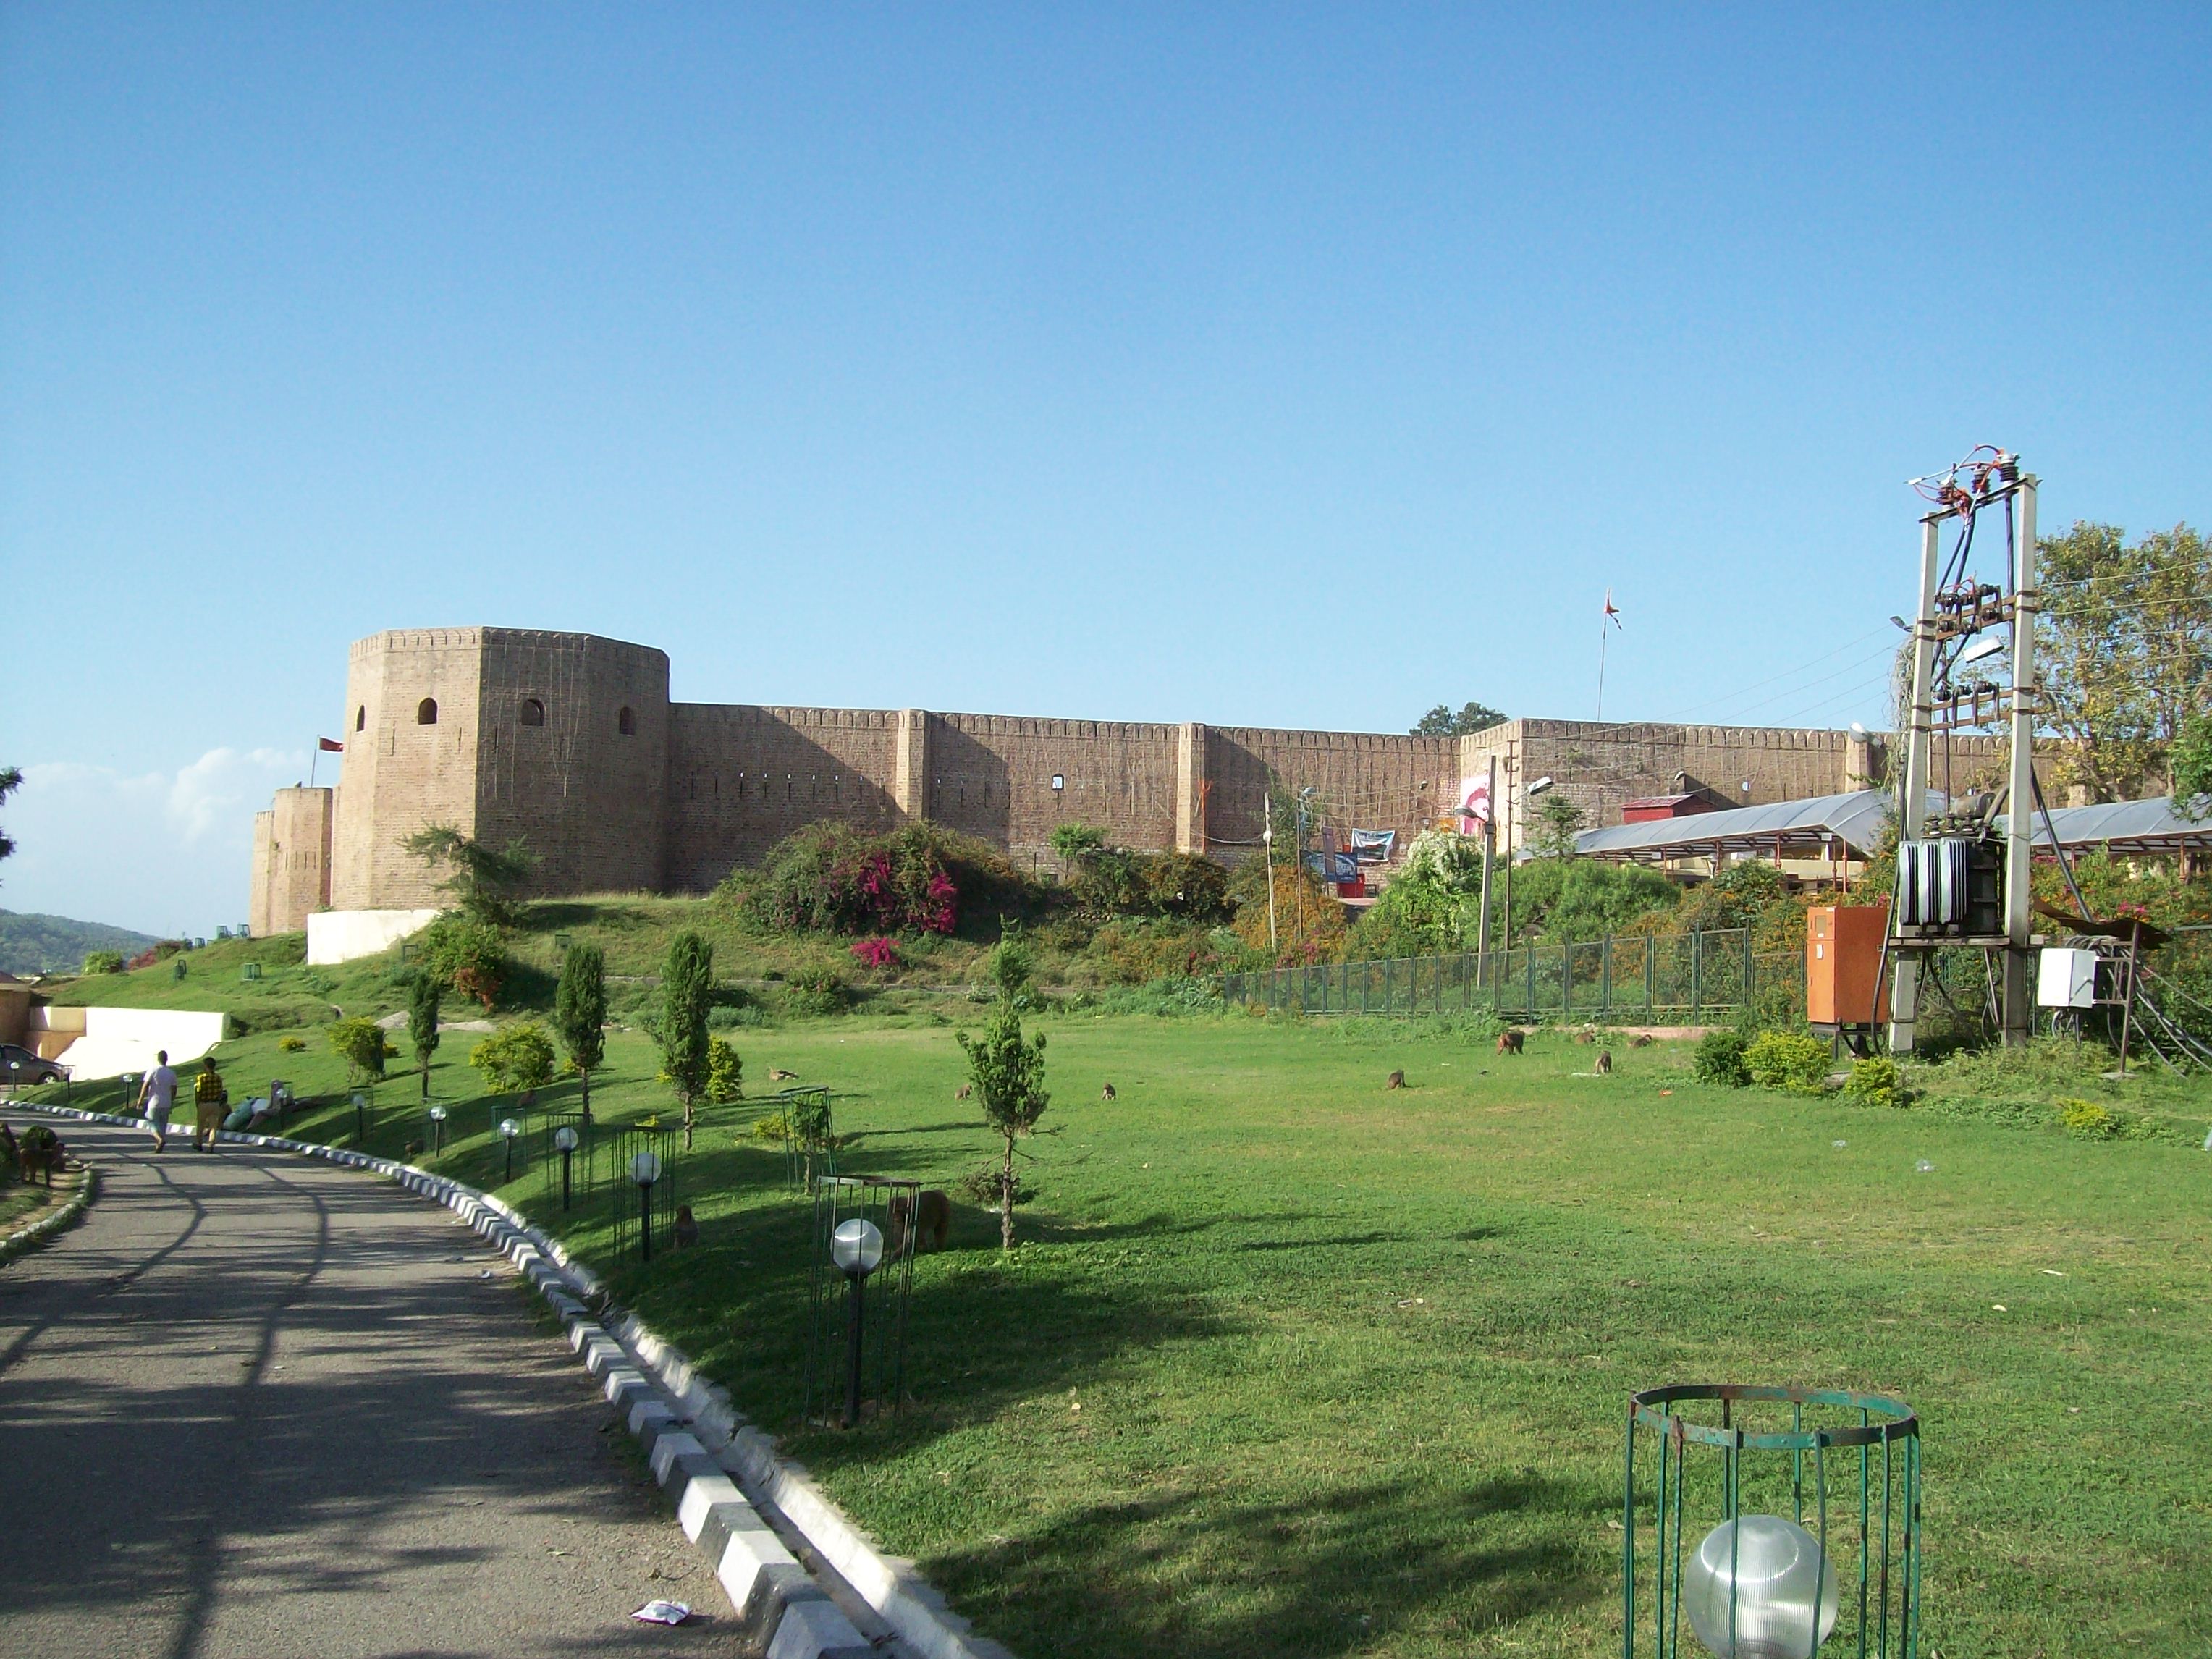 Bahu Fort and Gardens